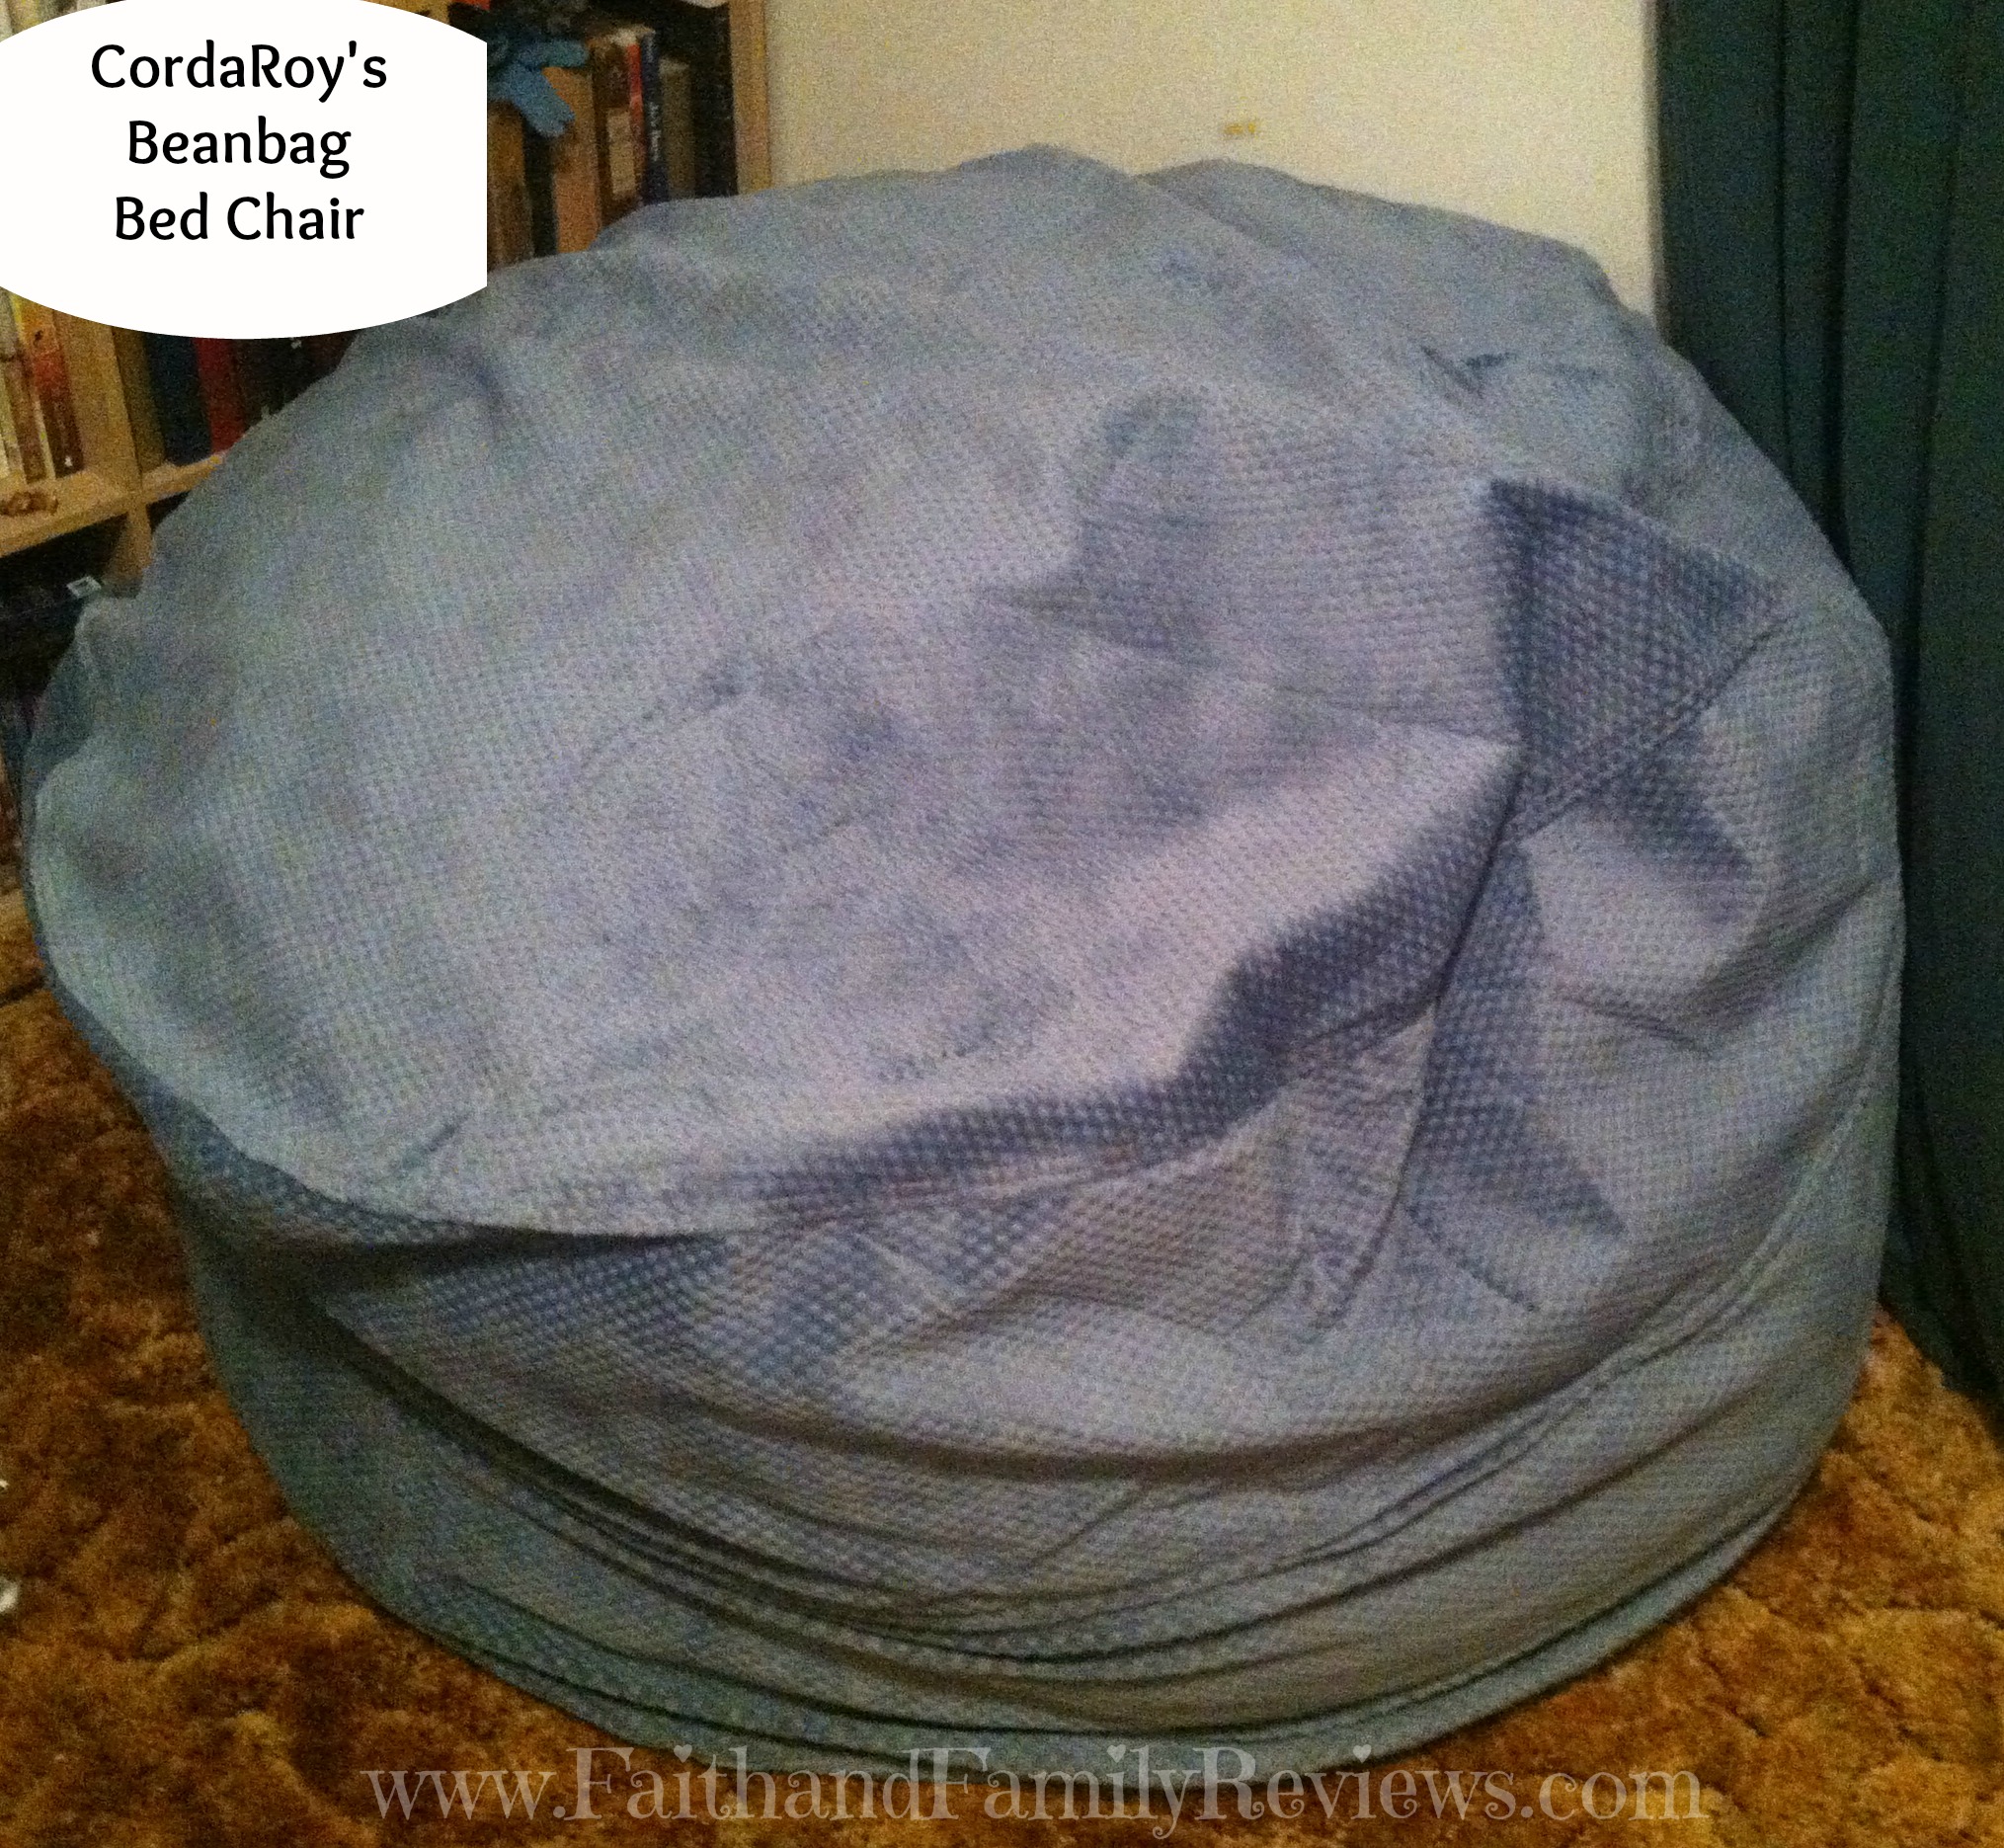 CordaRoy's Beanbag Bed Chair_